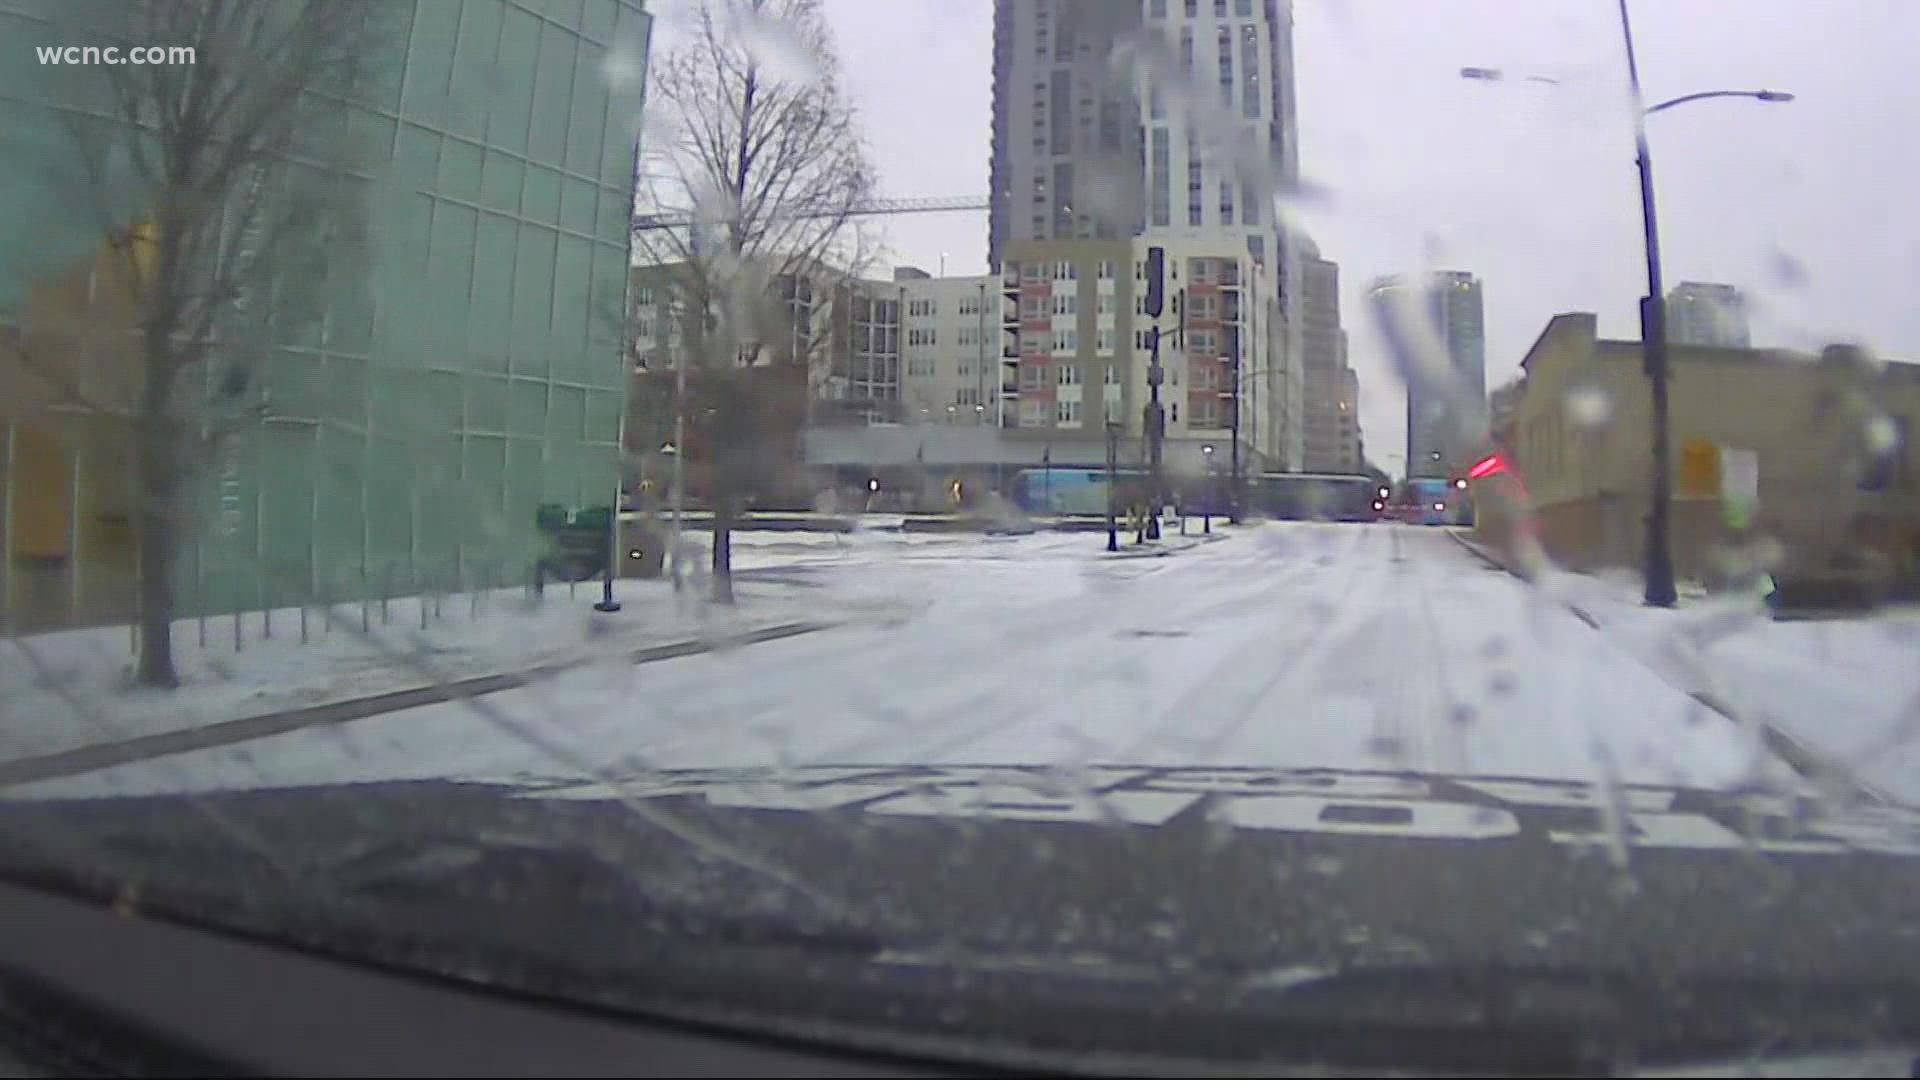 The winter storm is causing messy conditions on Charlotte roads with a mix of snow, sleet and ice covering the streets.